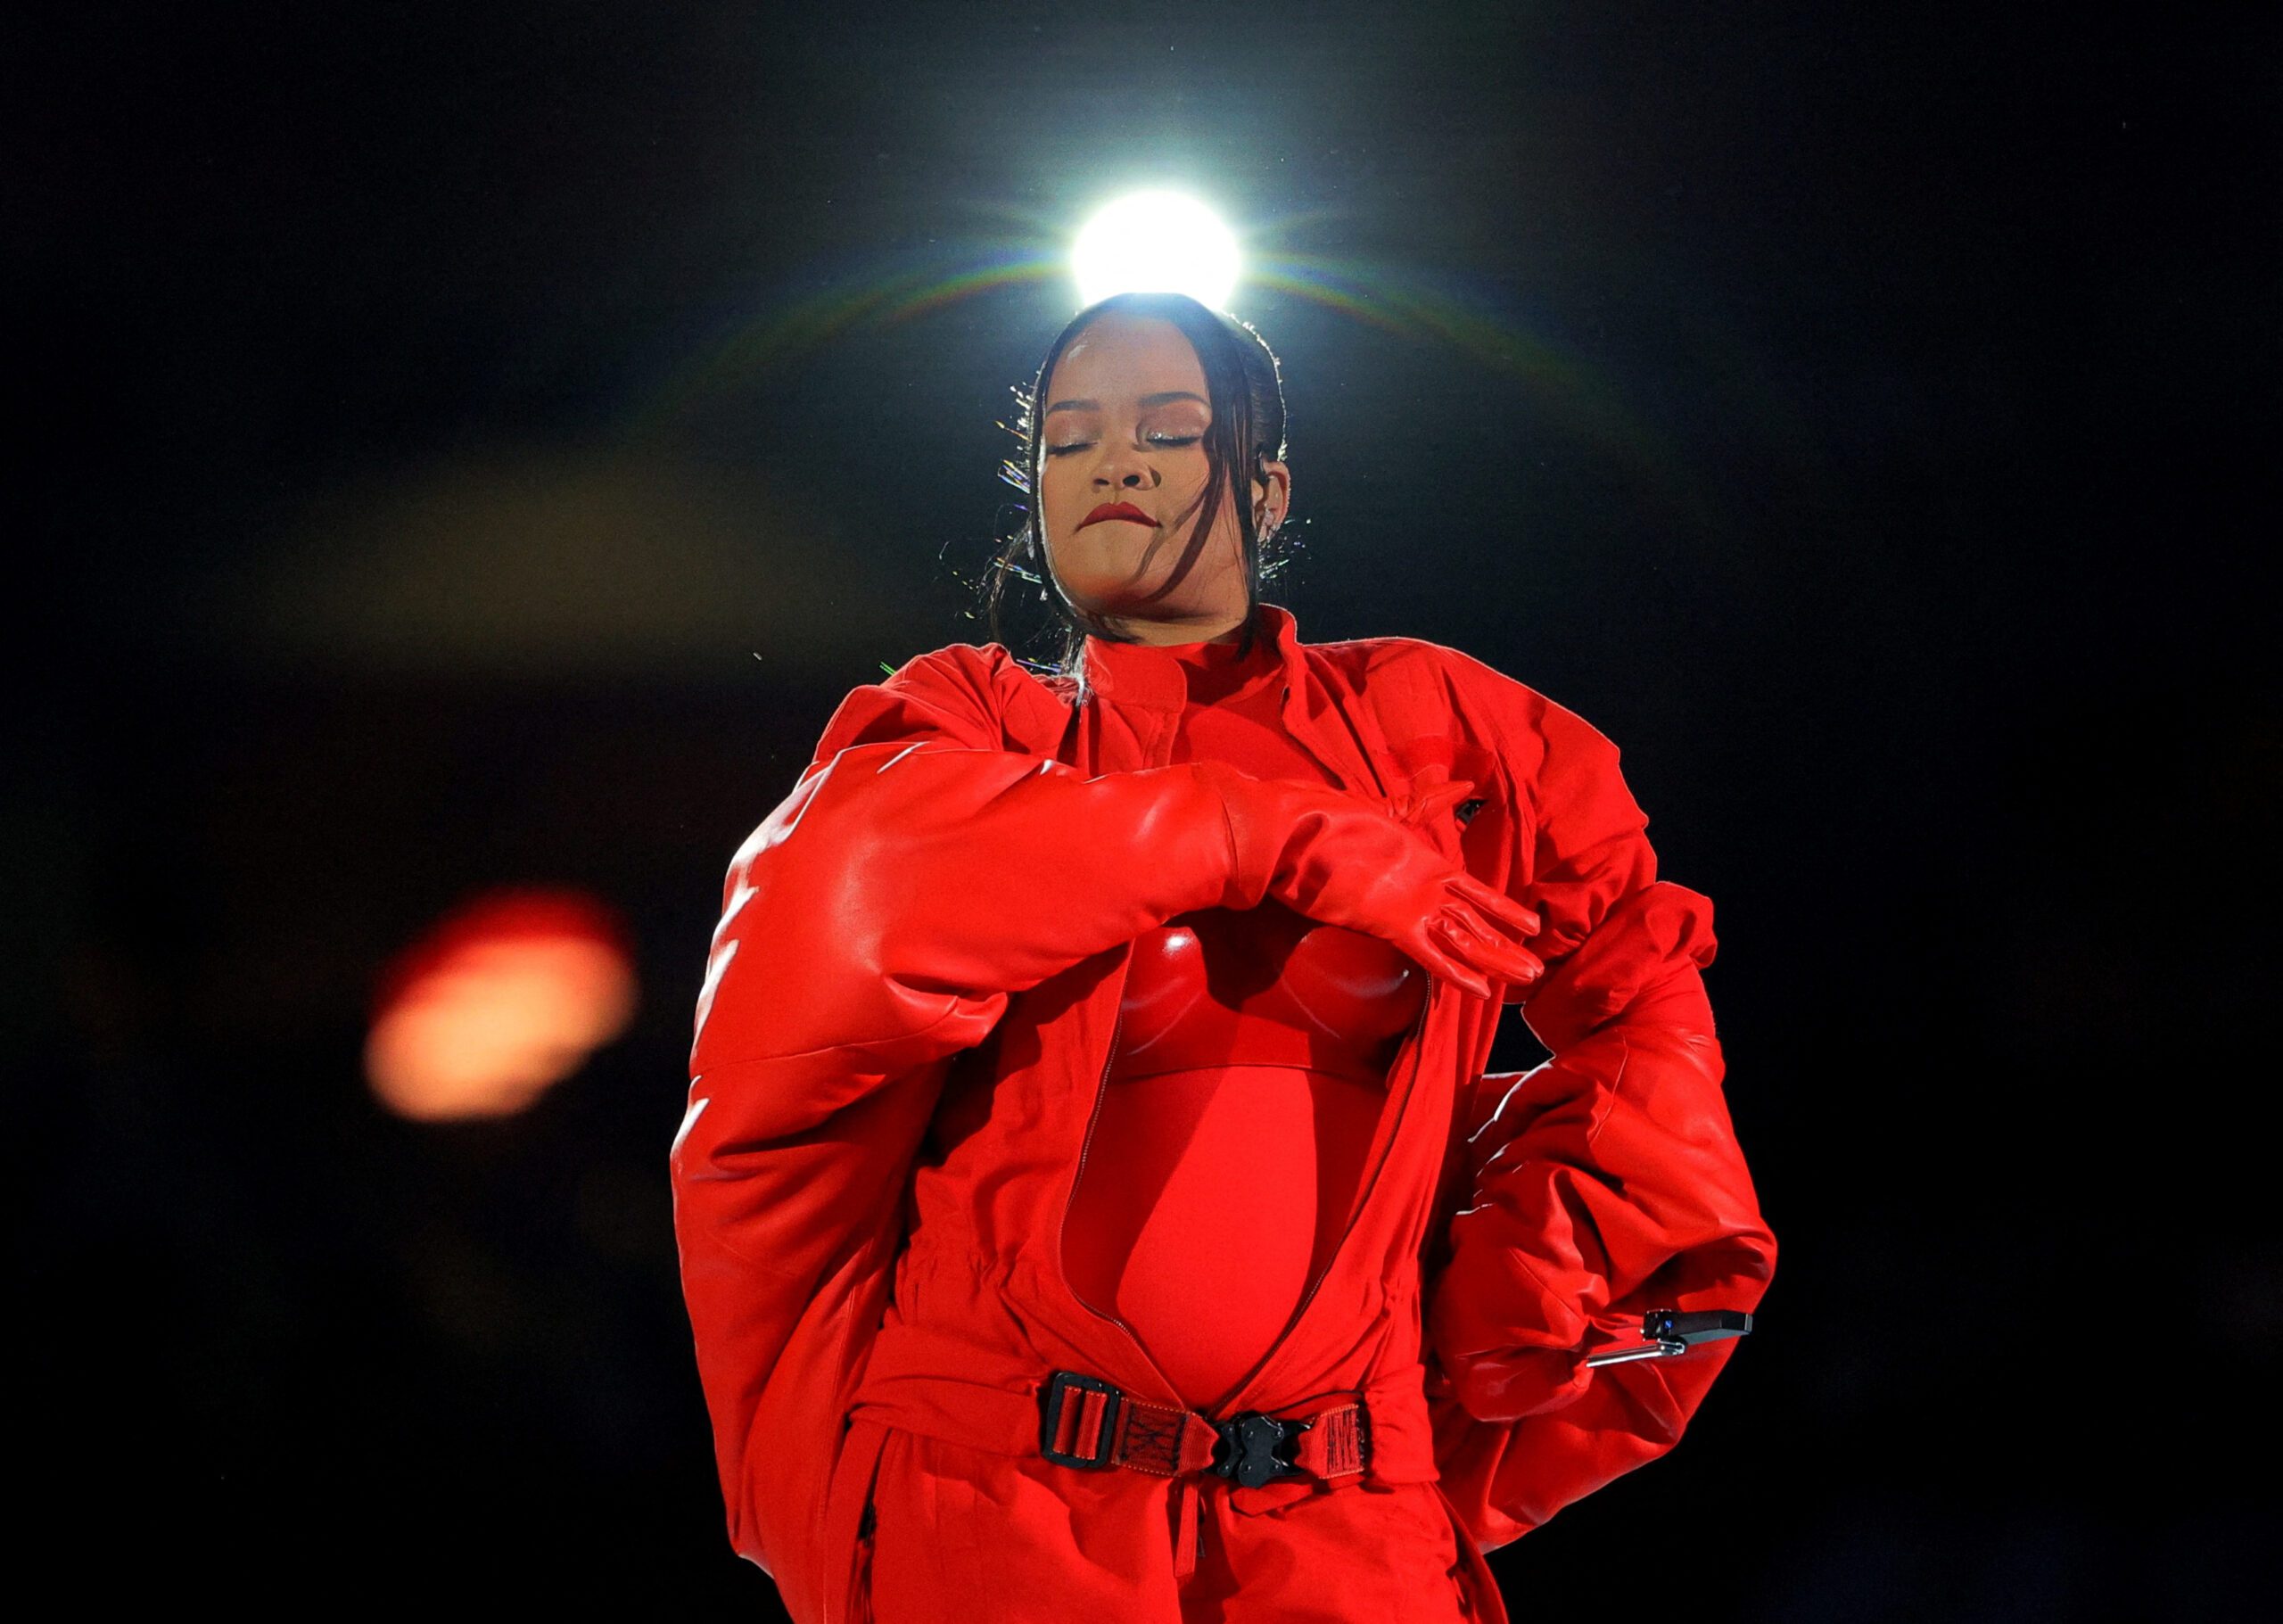 Pregnant Rihanna lights up Super Bowl stage with ‘Diamonds’